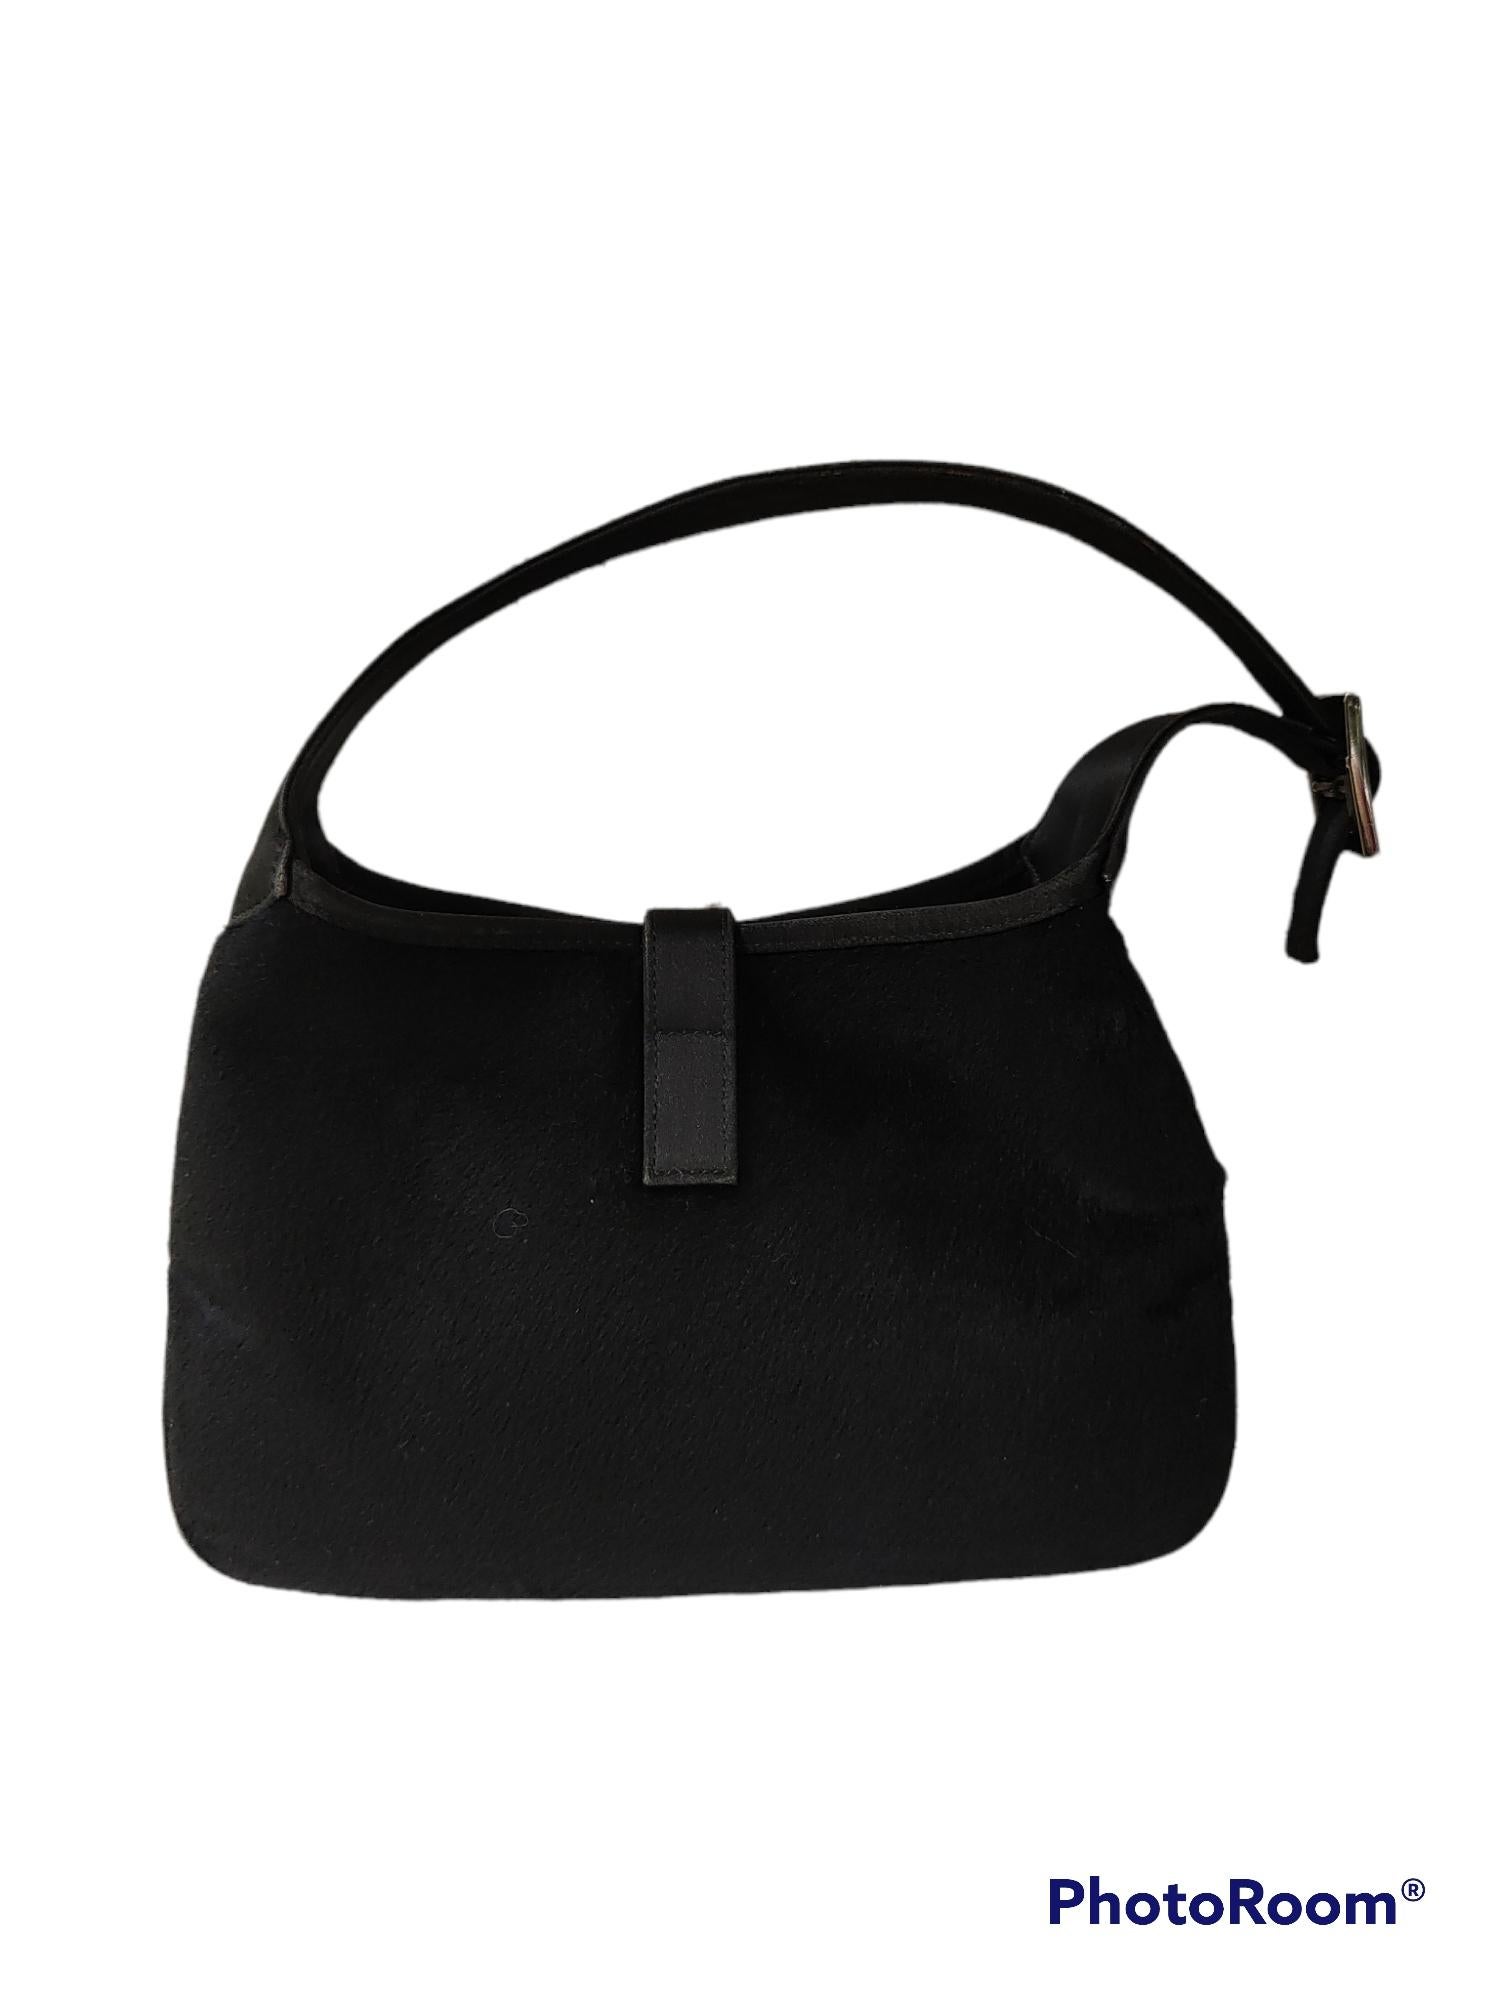 Gucci black leather black pony hair micro jackie shoulder bag
totally made in italy
measurements: 16 * 23 cm